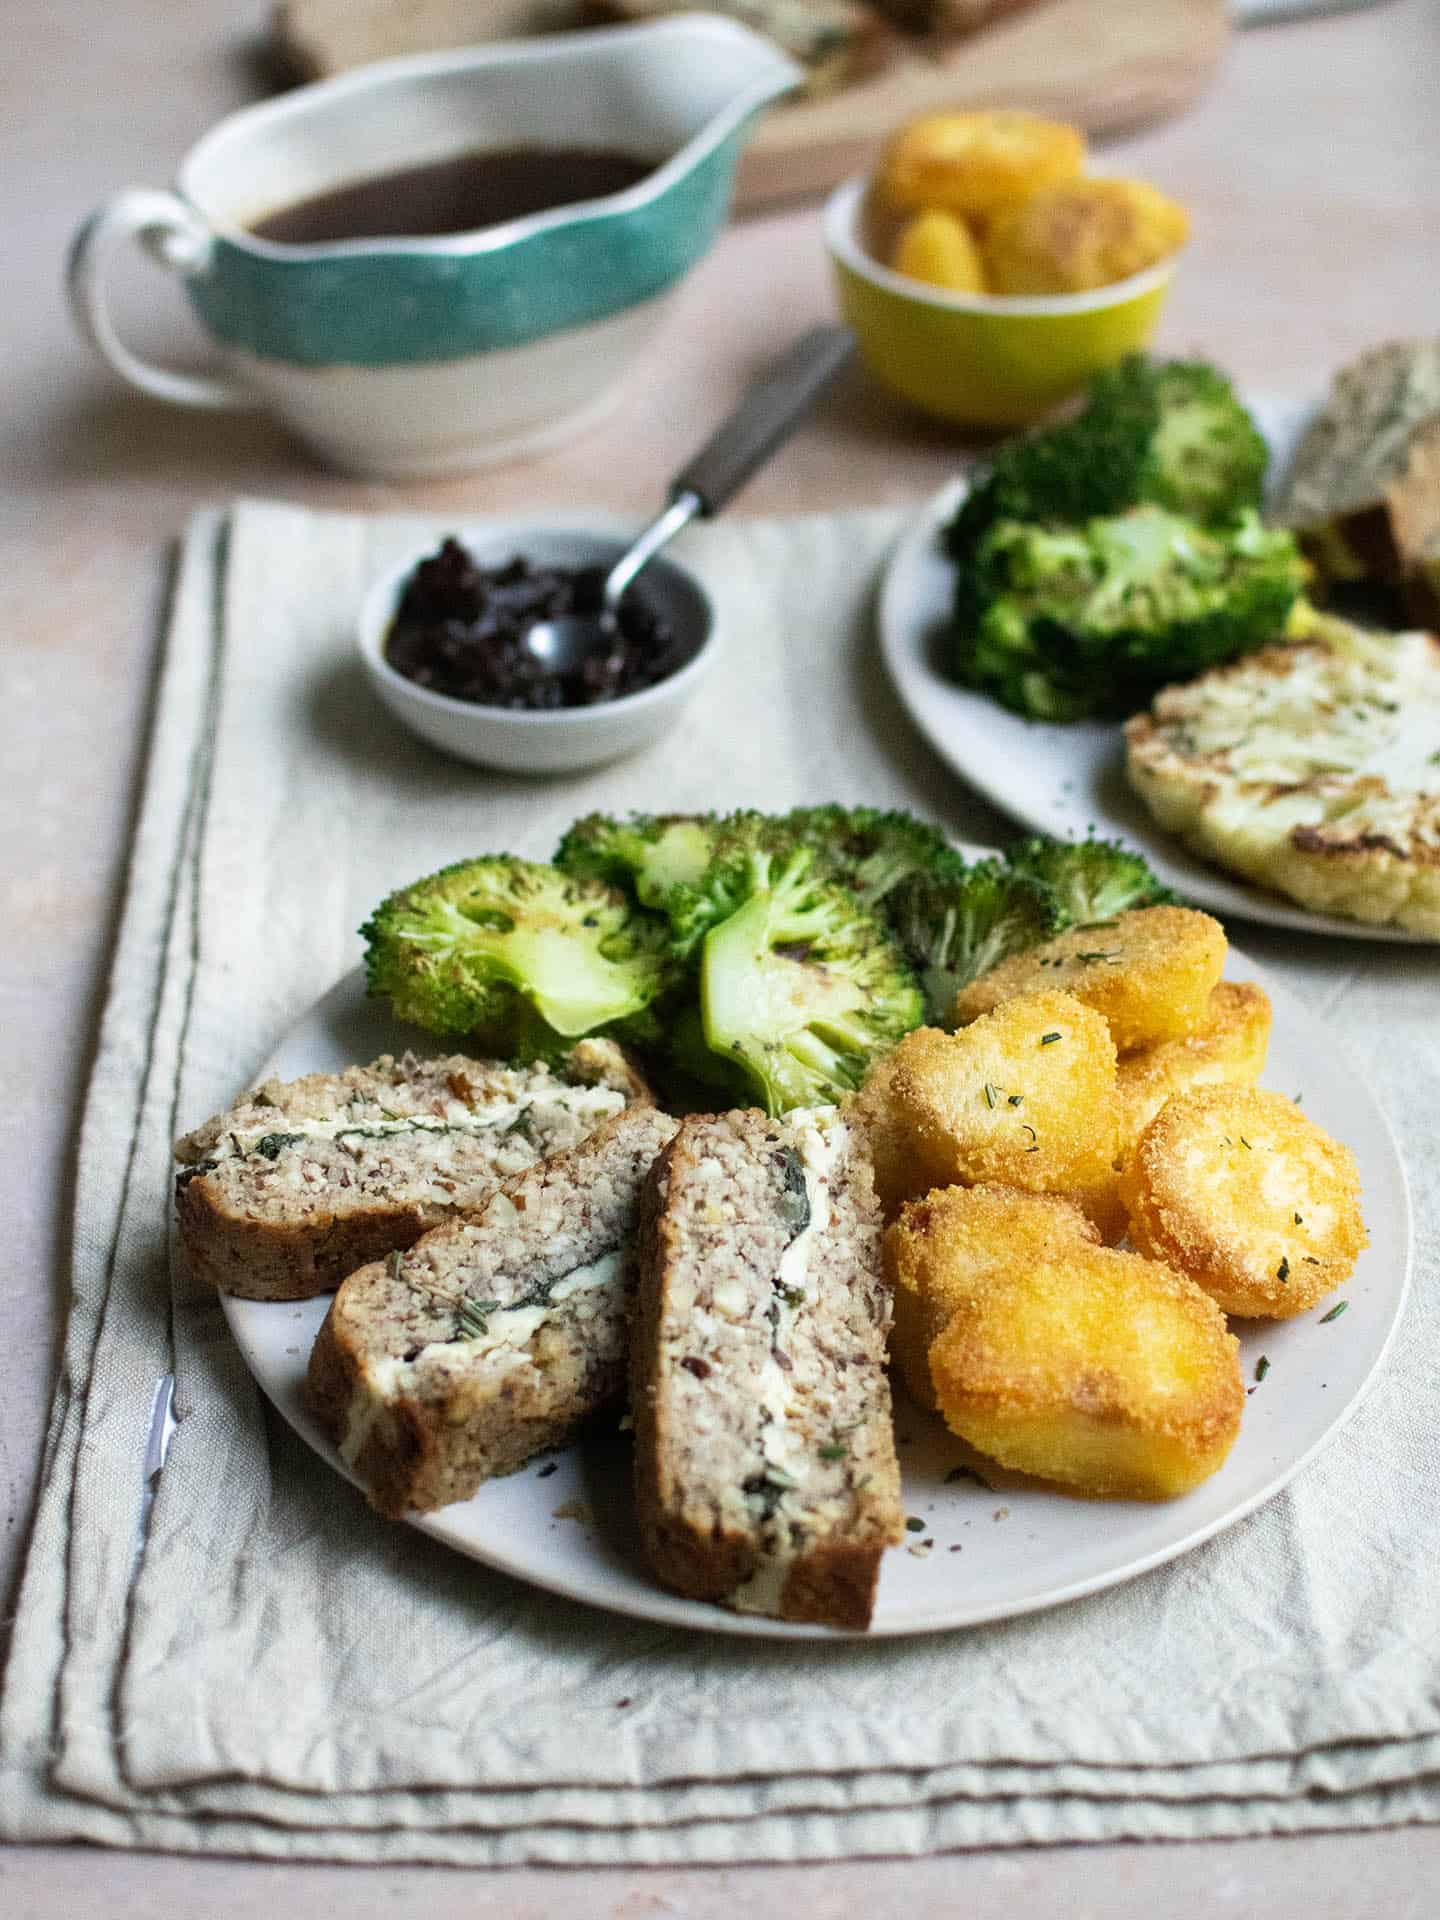 A photo with a plate filled with food at the forefront of it. The plate has slices of cashew nut roast, roast potatoes and broccoli on it. In the background is a jug of gravy, a small bowl of roast potatoes and to the side is a second plate which has a roasted cauliflower steak on, as well as the nut roast and broccoli.